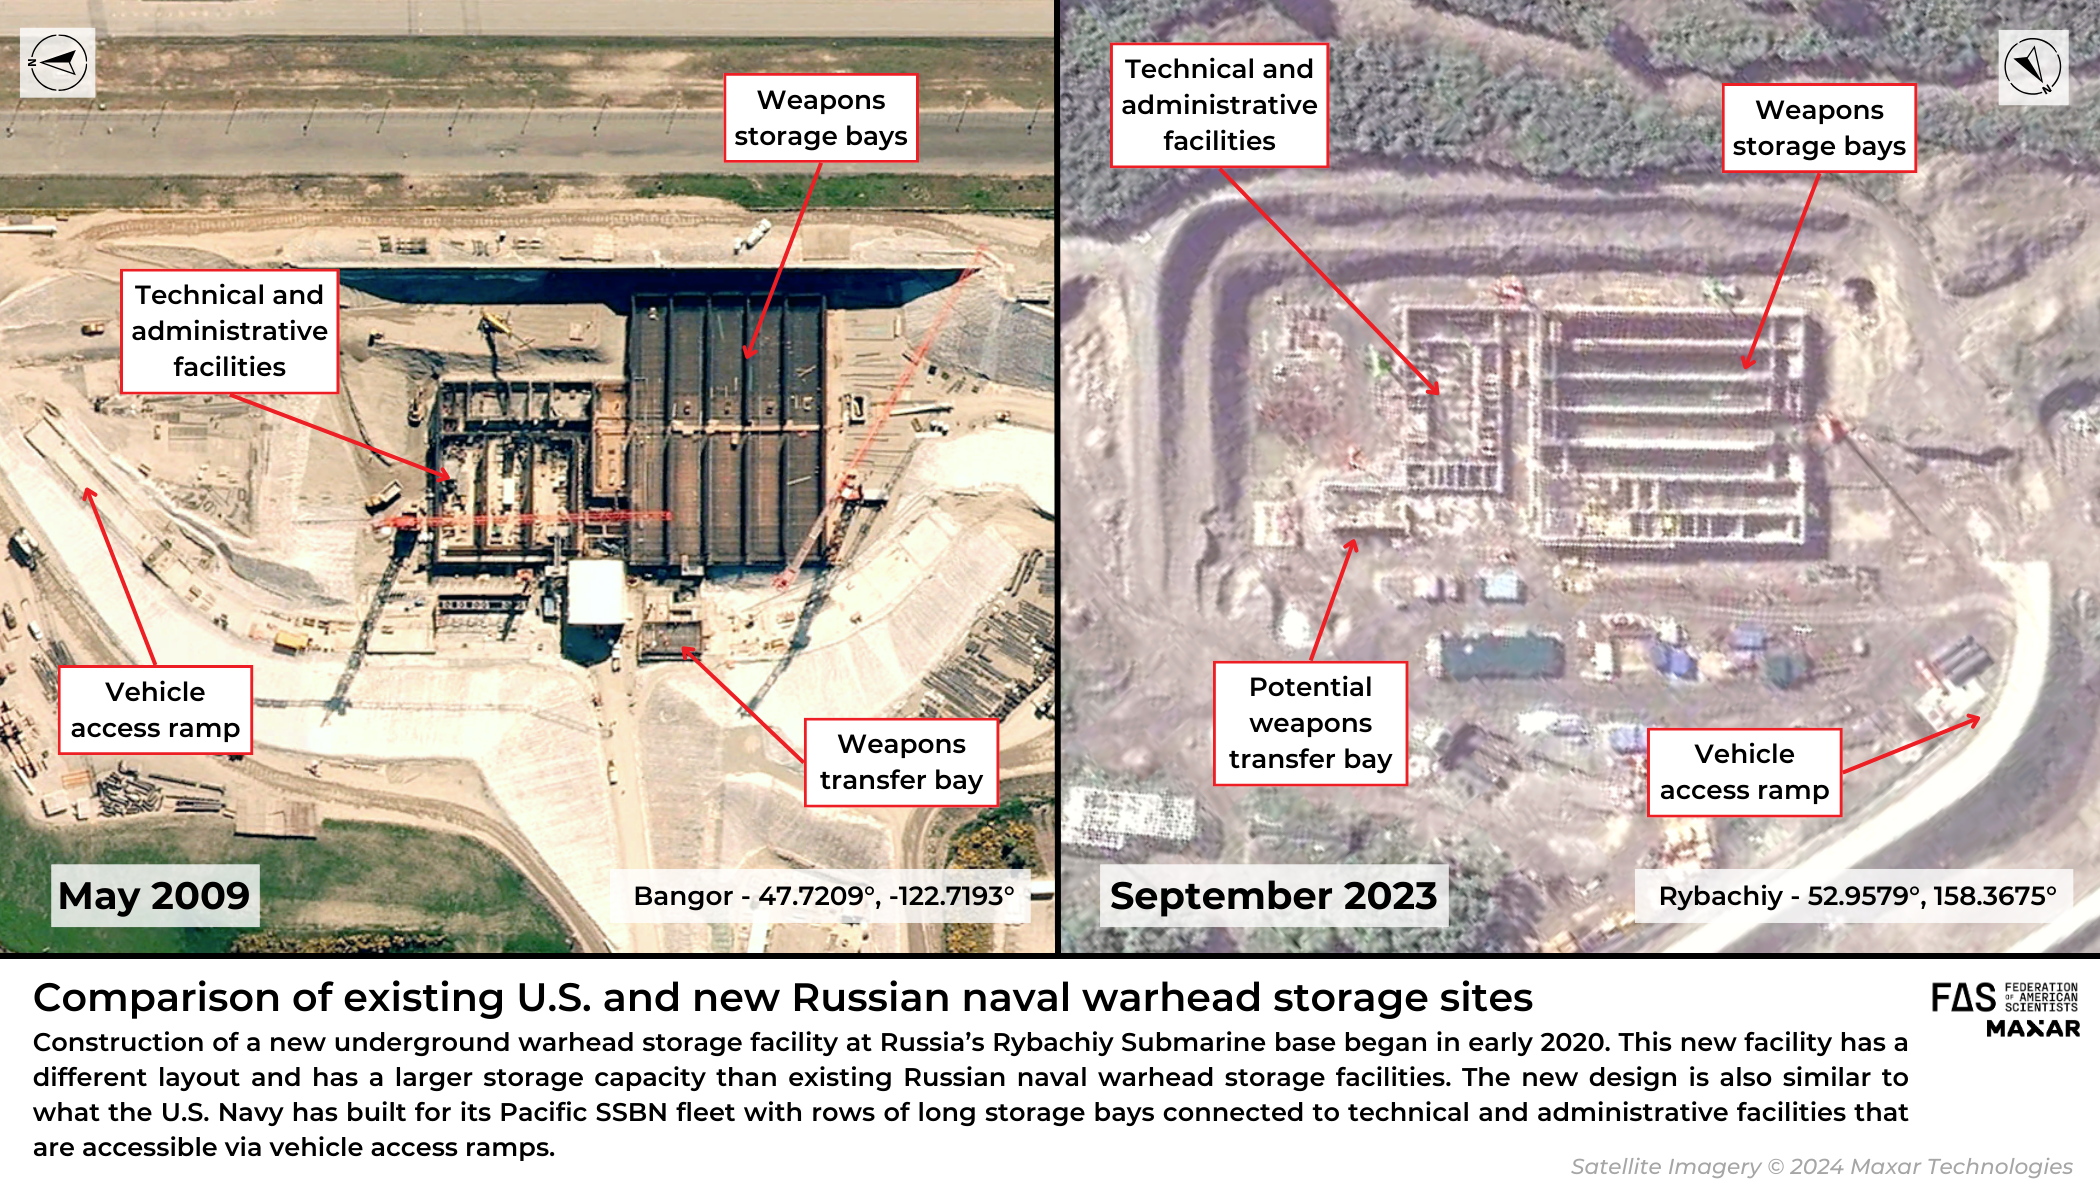 Construction of a new underground warhead storage facility at Russia's Rybachiy Submarine base began in early 2020. This new facility has a different layout and has a larger storage capacity than existing Russian naval warhead storage facilities. The new design is also similar to what the U.S. Navy has built for its Pacific SSBN fleet with rows of long storage bays connected to technical and administrative facilities that are accessible via vehicle access ramps.